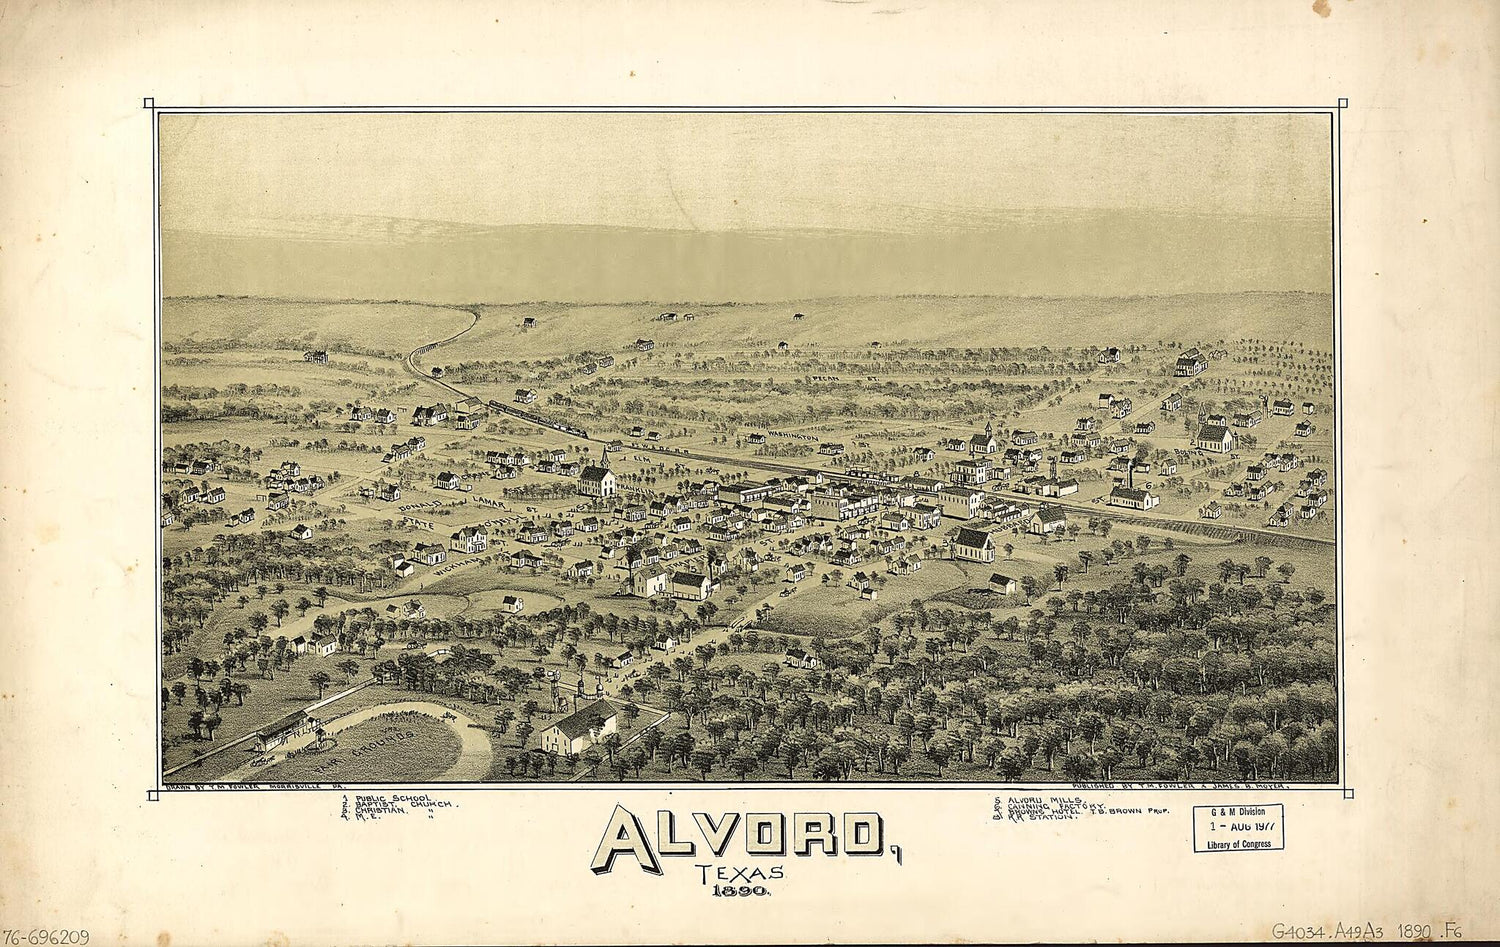 This old map of Alvord, Texas from 1890 was created by T. M. (Thaddeus Mortimer) Fowler, James B. Moyer in 1890